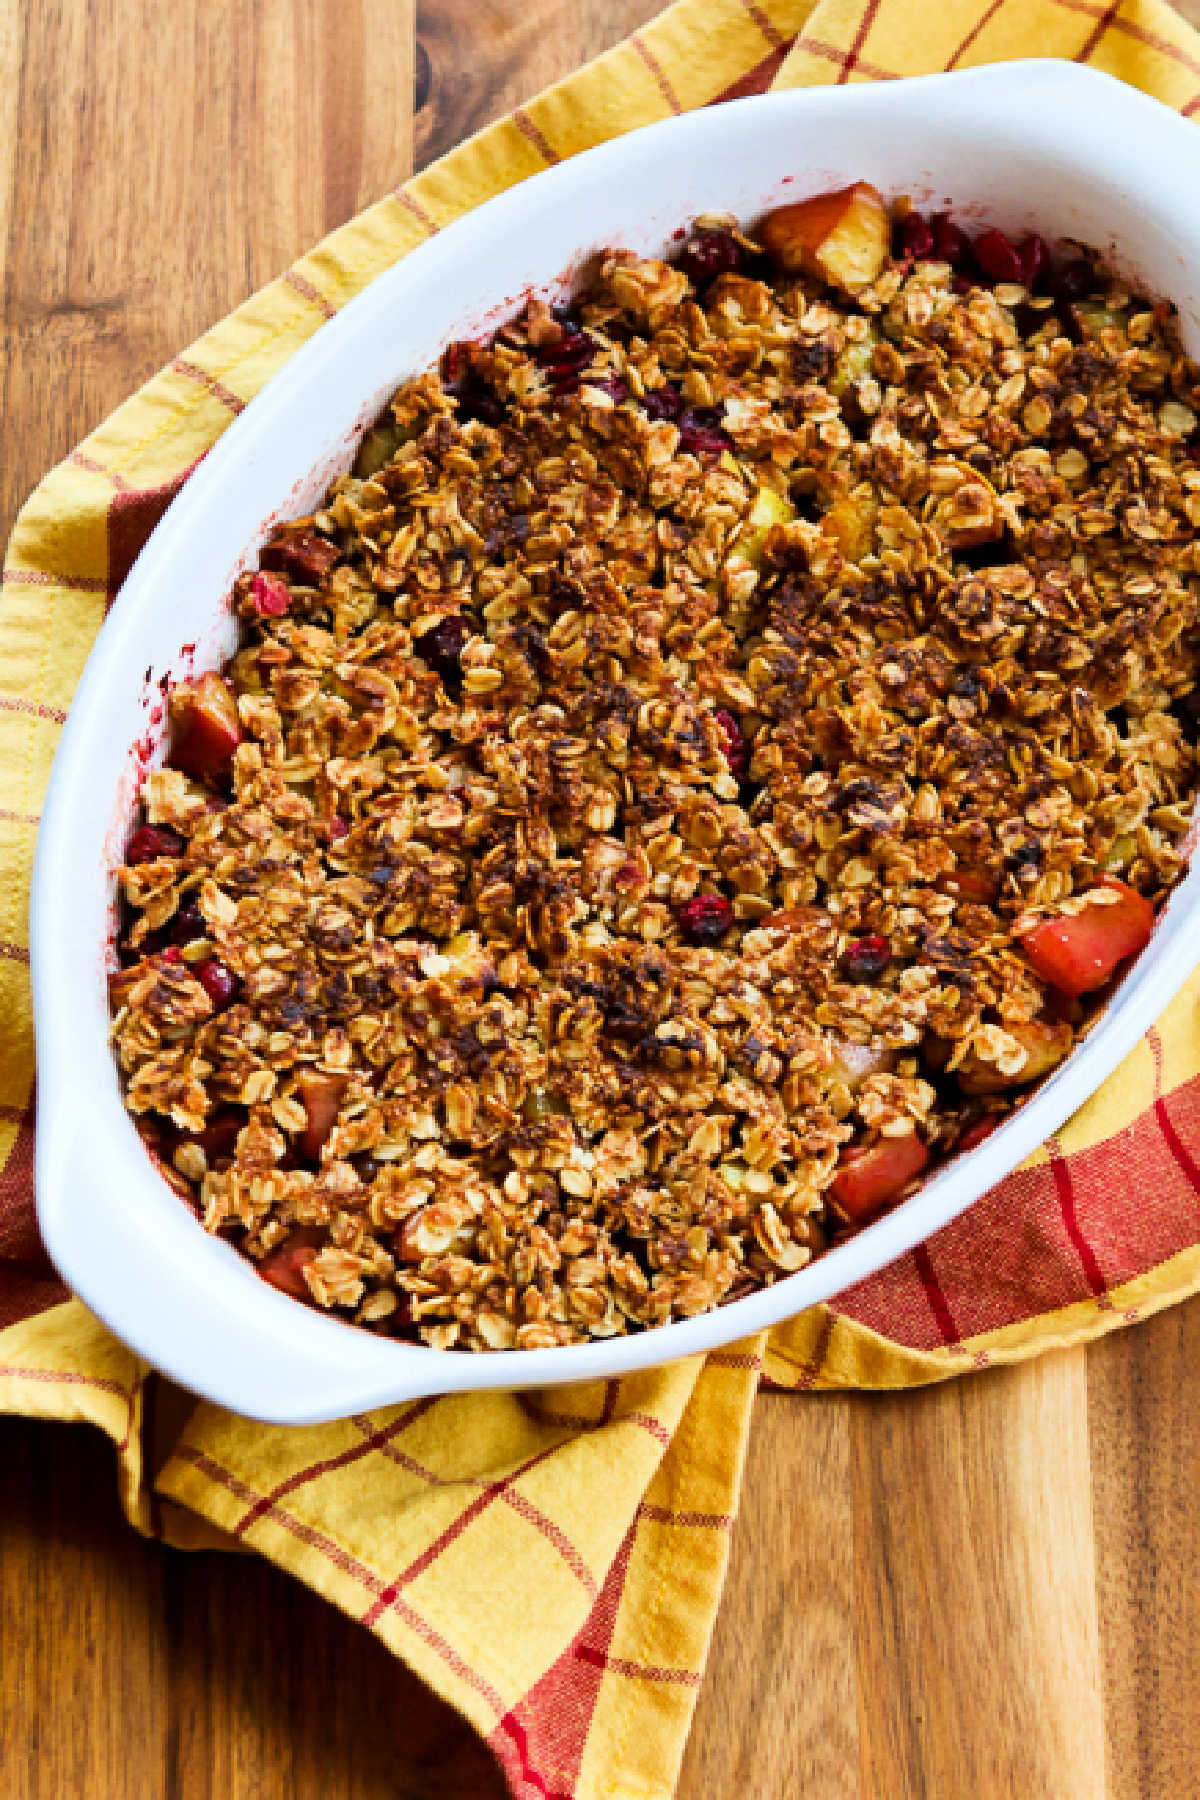 Cranberry Apple Crisp shown in baking dish with napkin